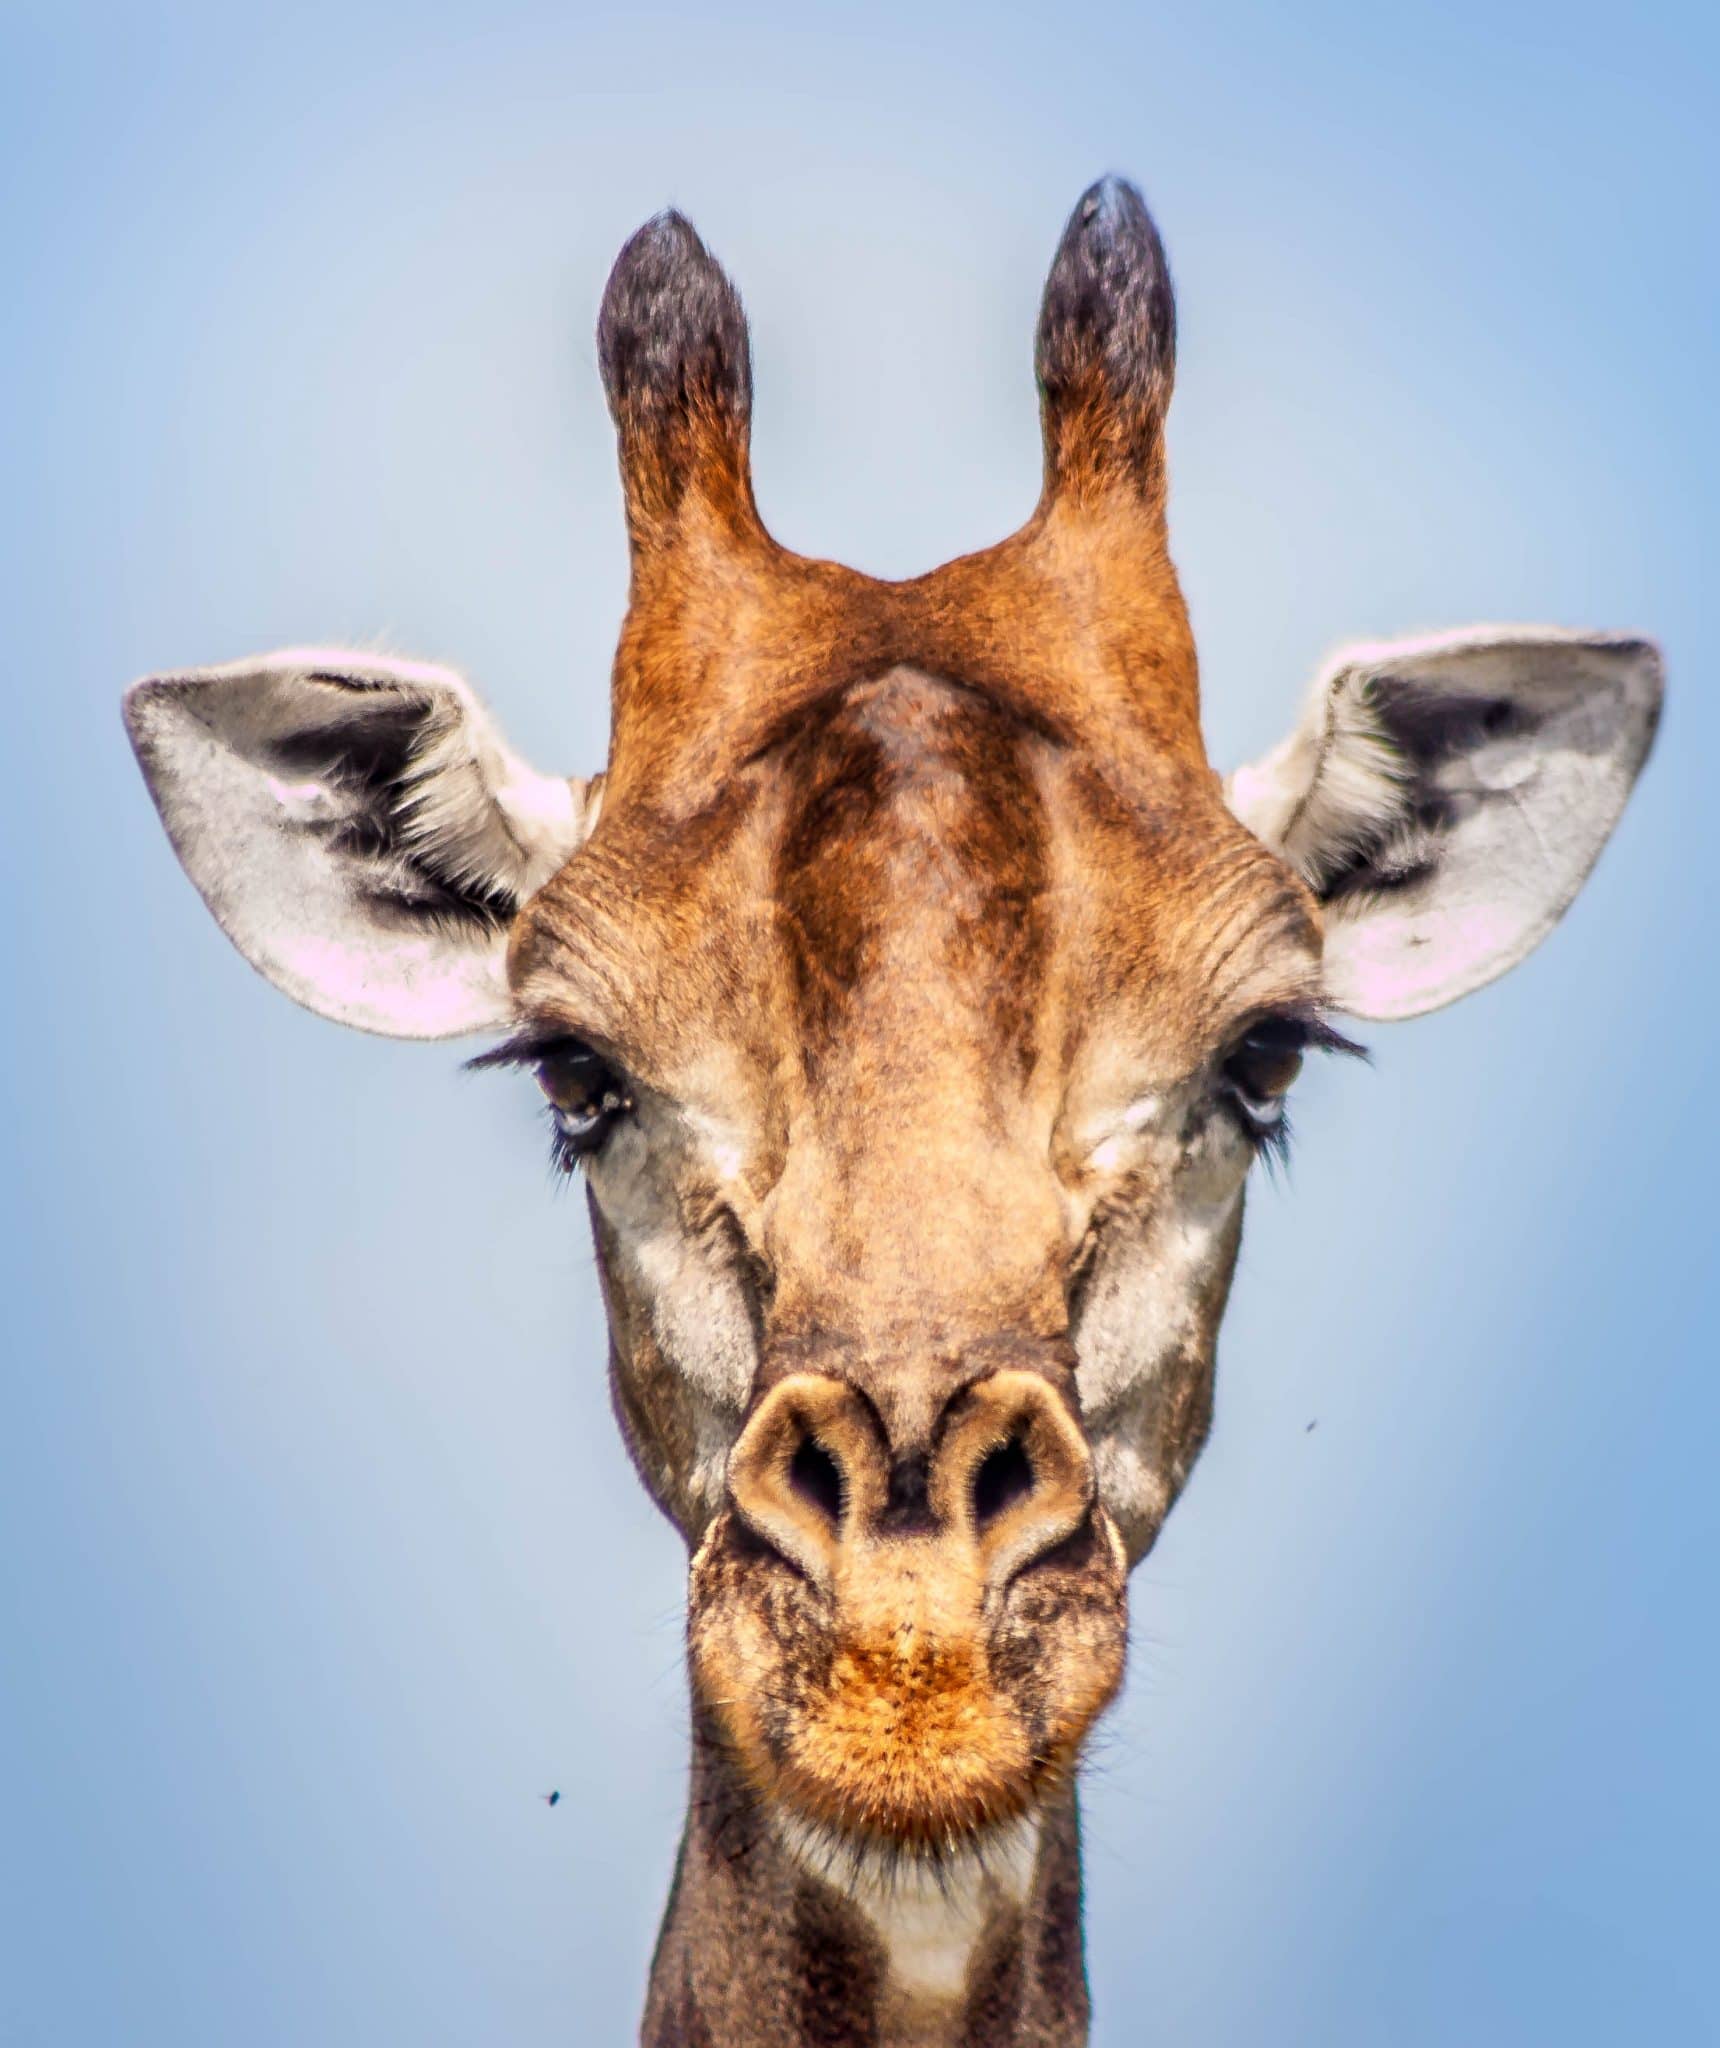 Giraffe Facts, Information Pictures and Video Learn More